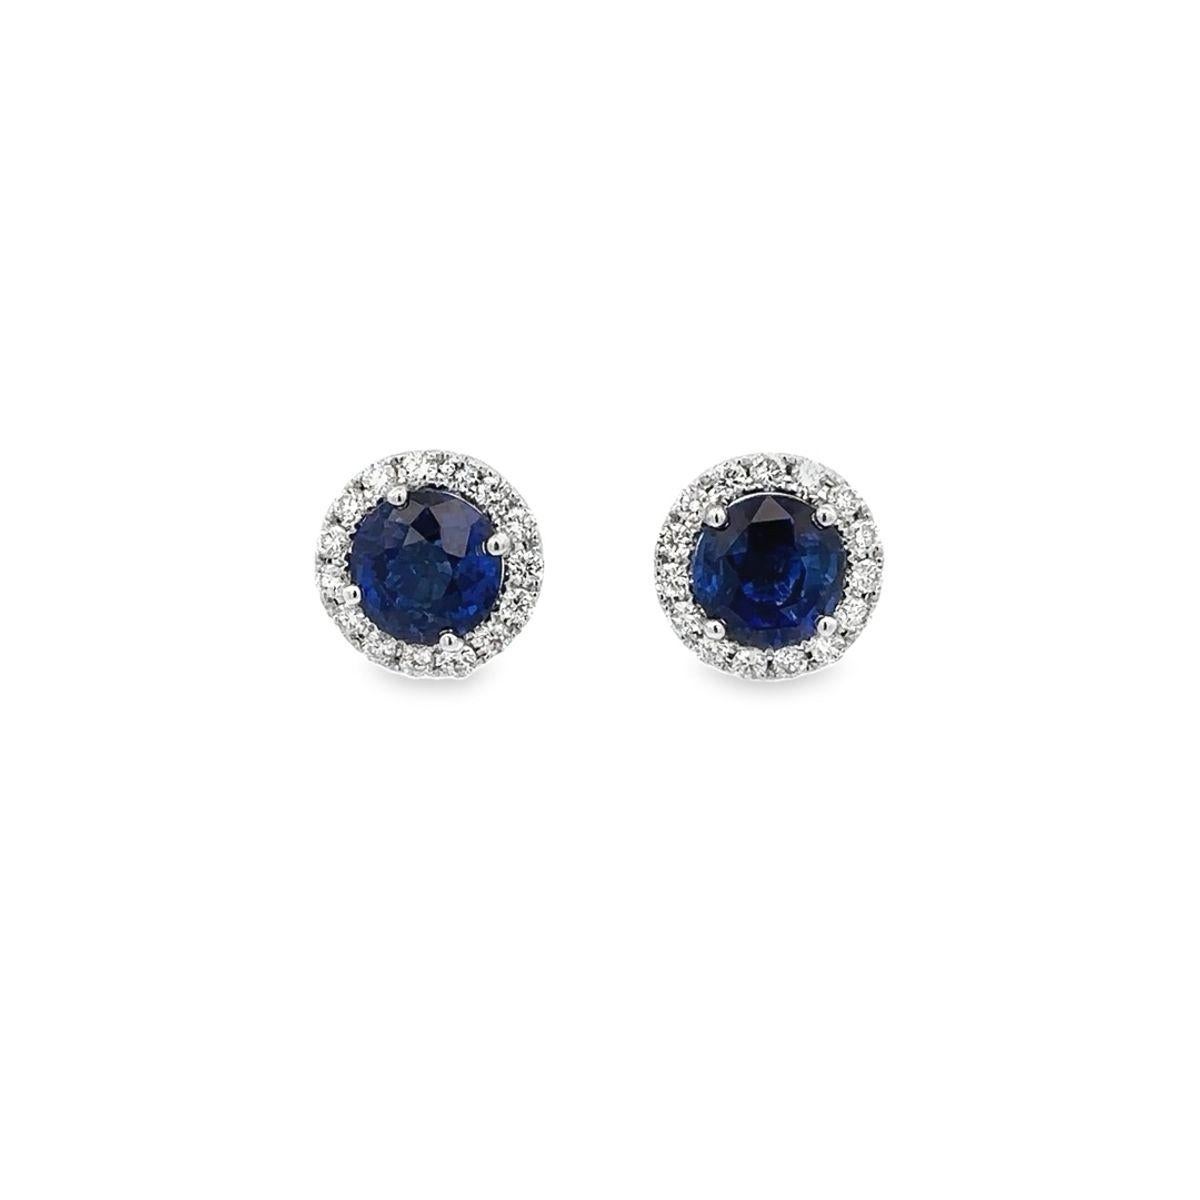 NEW 18k Gold 5.78ctw GIA Round Vivid Blue Sapphire & Diamond Halo Stud Earrings For Sale 4